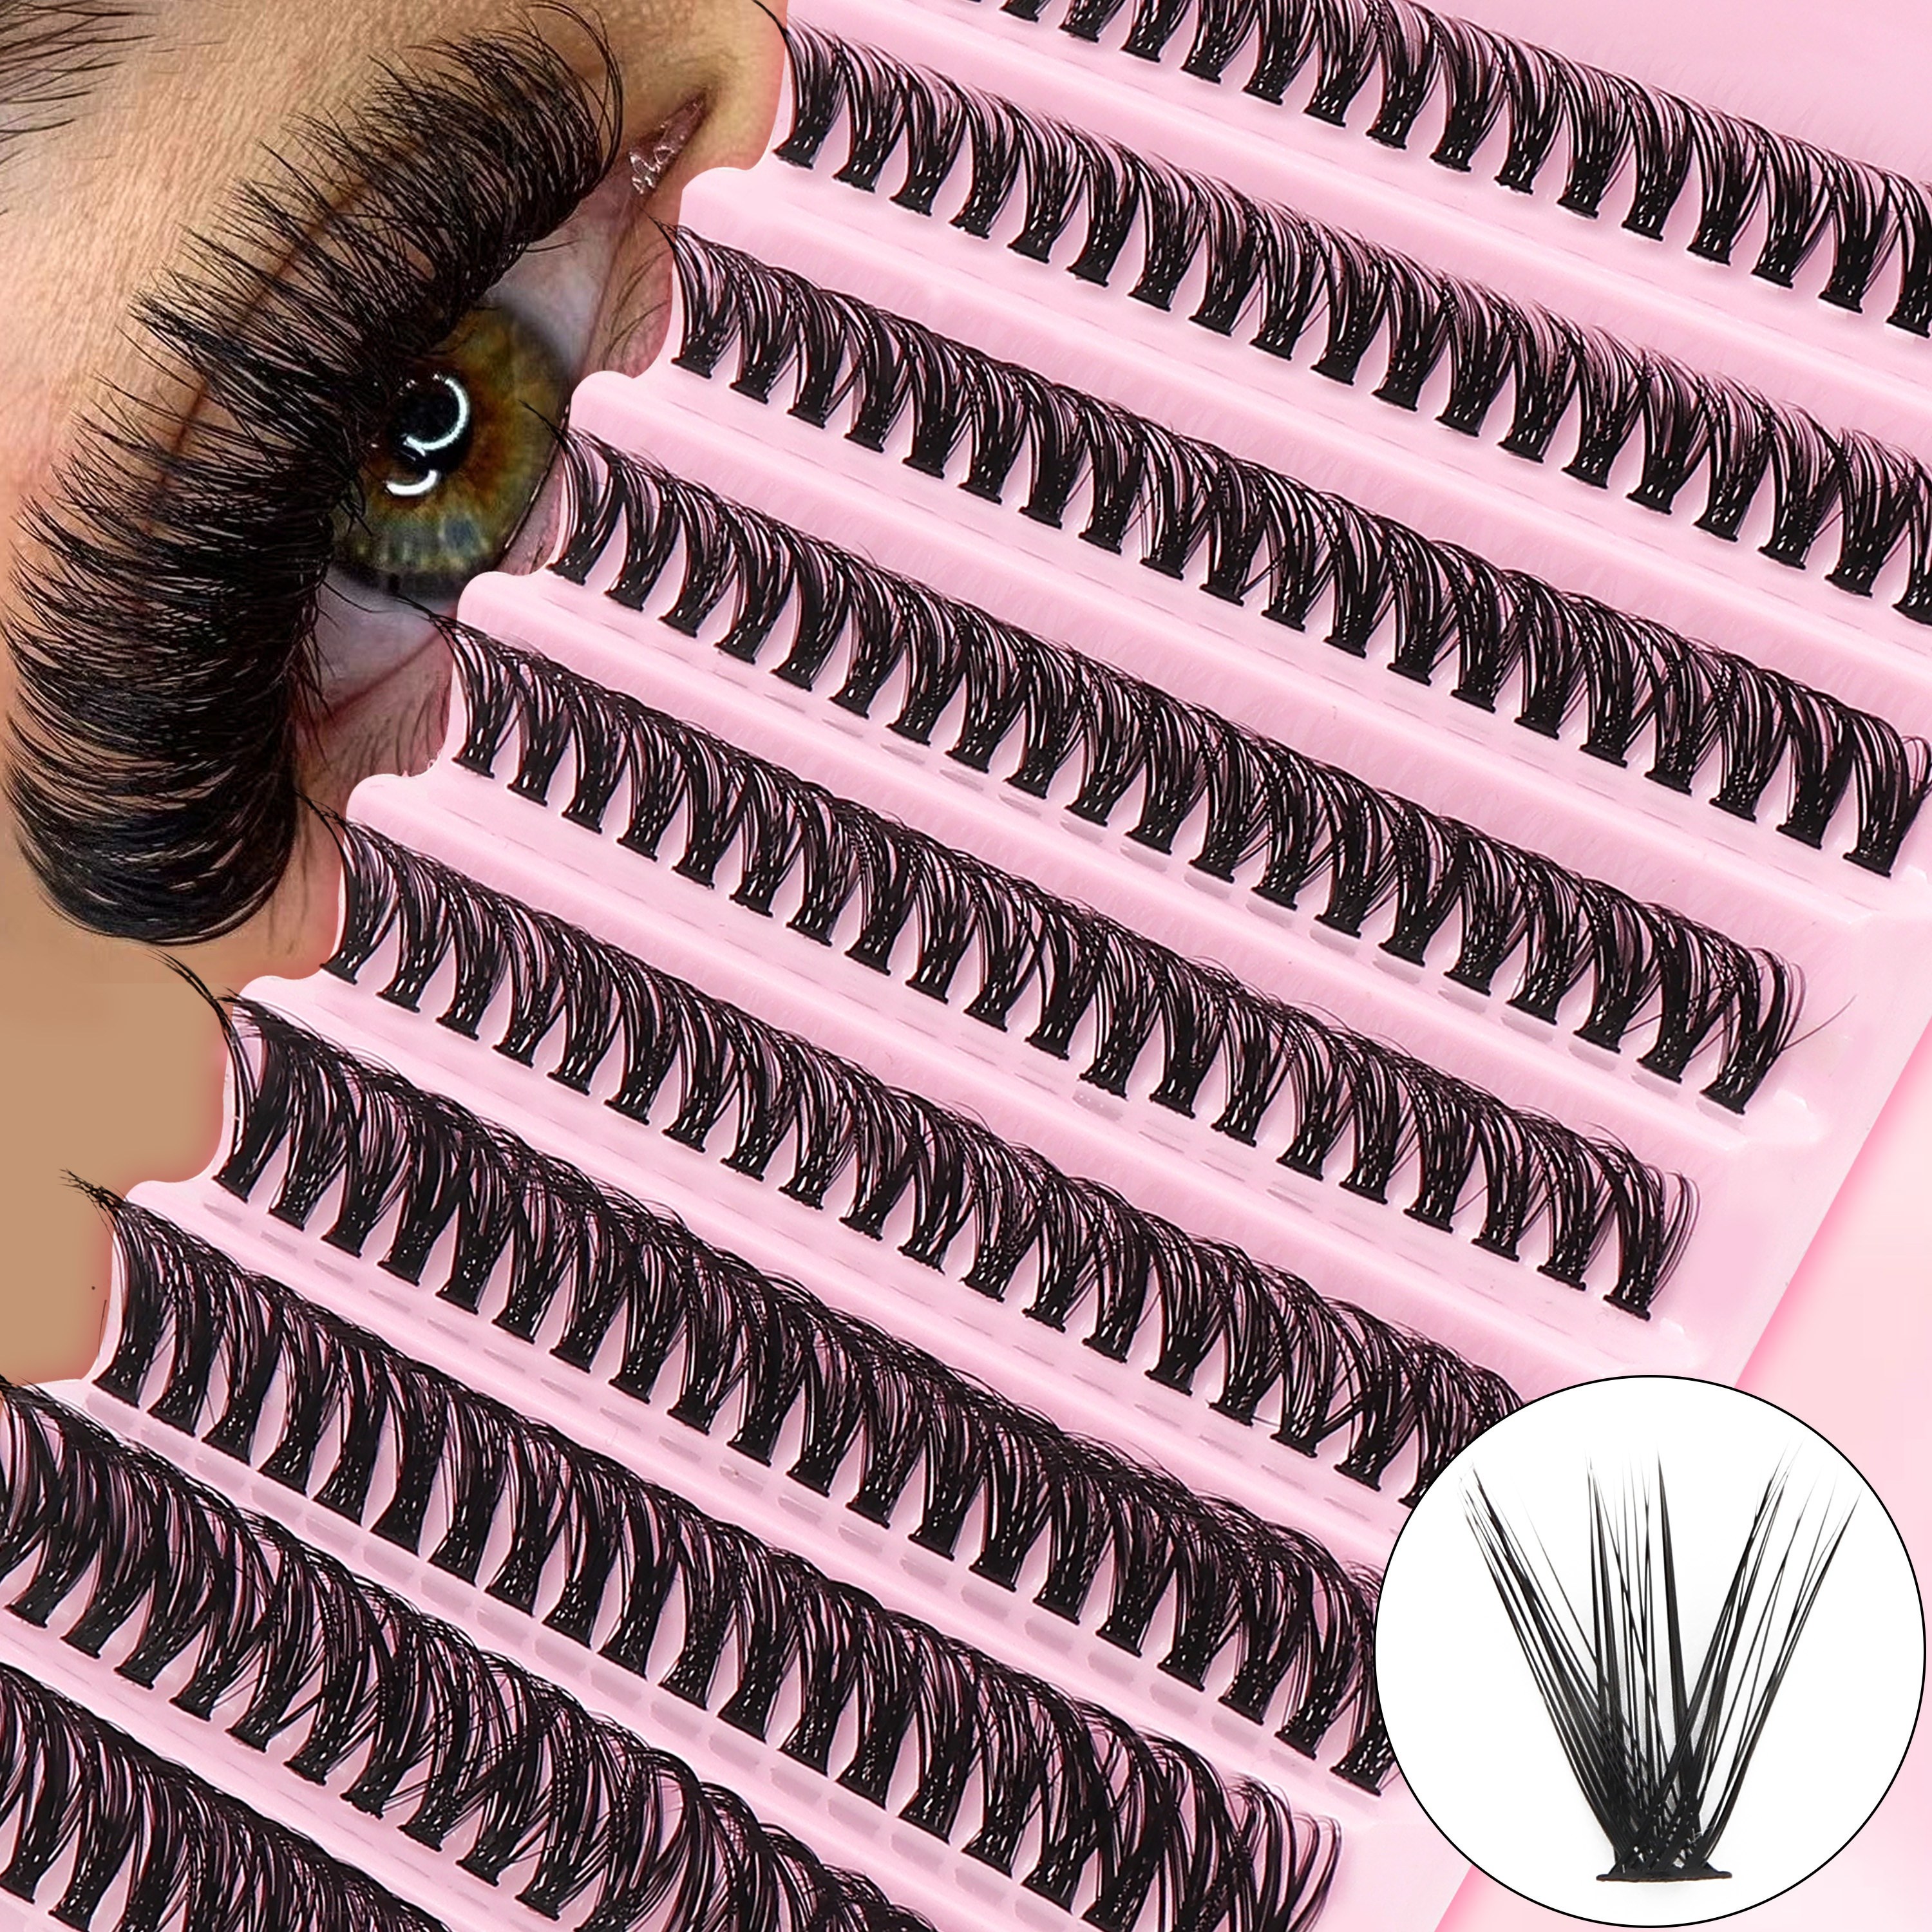 

Faux Mink Eyelashes 200pcs - Natural Look, Fluffy & Cross Style, Diy Lash Extensions, Beginner Friendly, Reusable, Thickness 0.07mm, Lengths 10-18mm, D